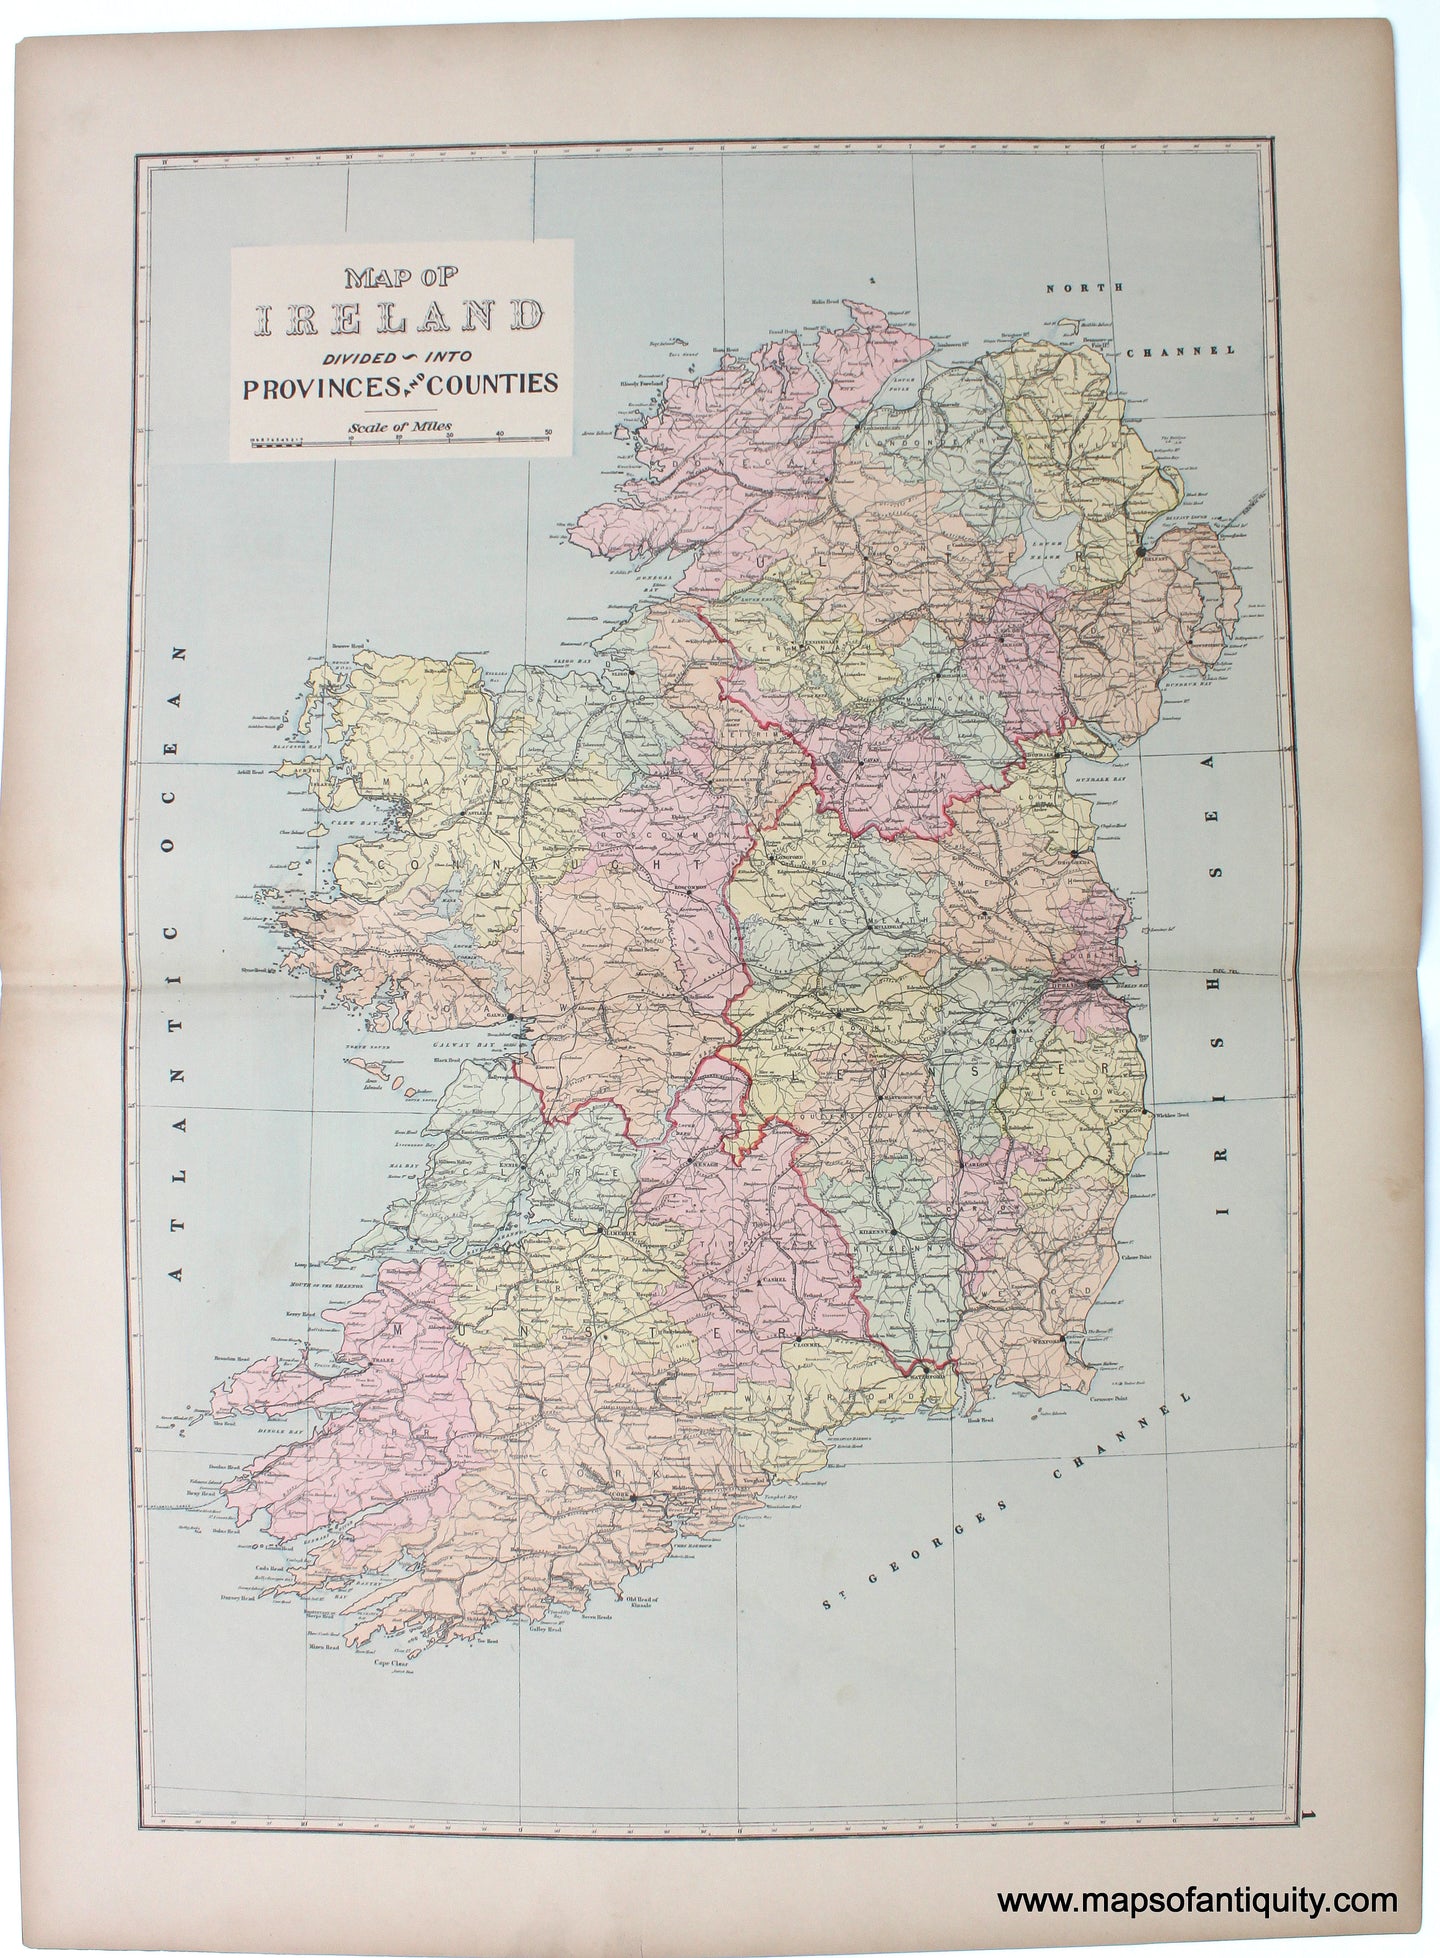 1901 - Map of Ireland Divided into Provinces and Counties - Antique Map